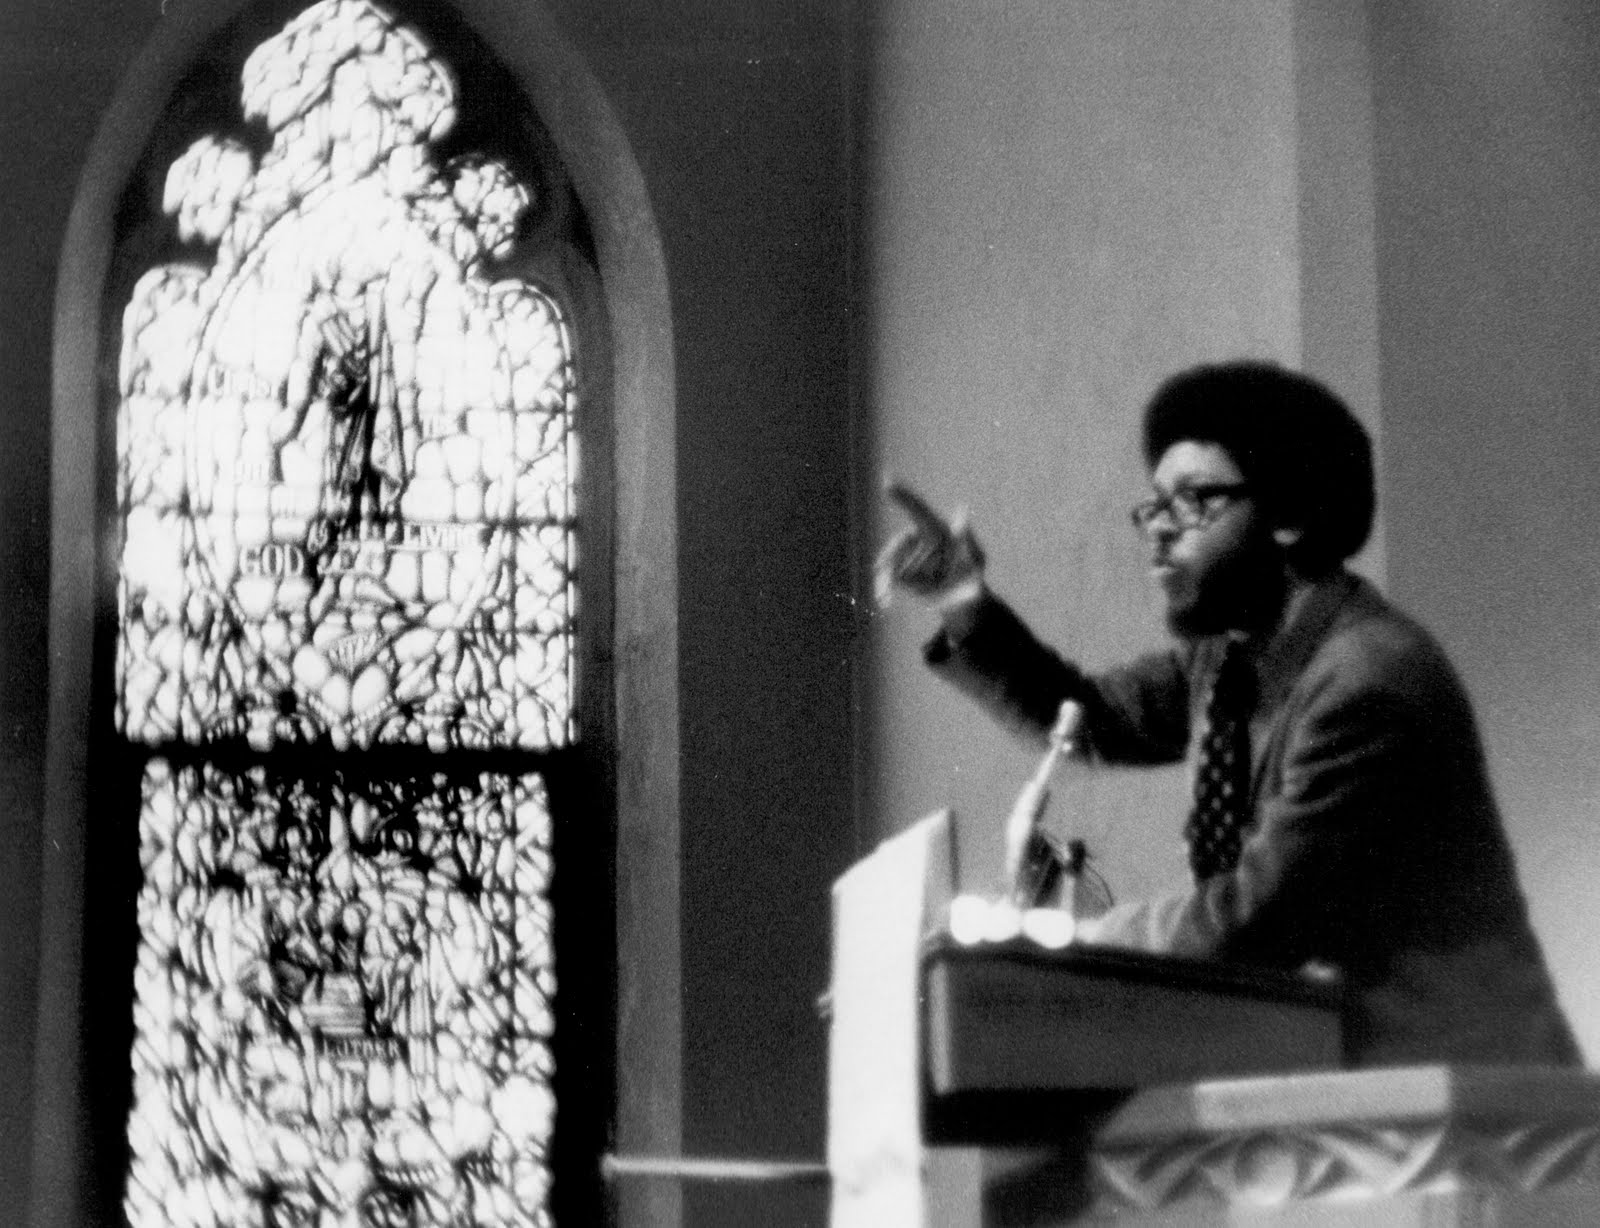 James H. Cone speaks at a church pulpit. He is wearing a suit and has glasses and an afro.